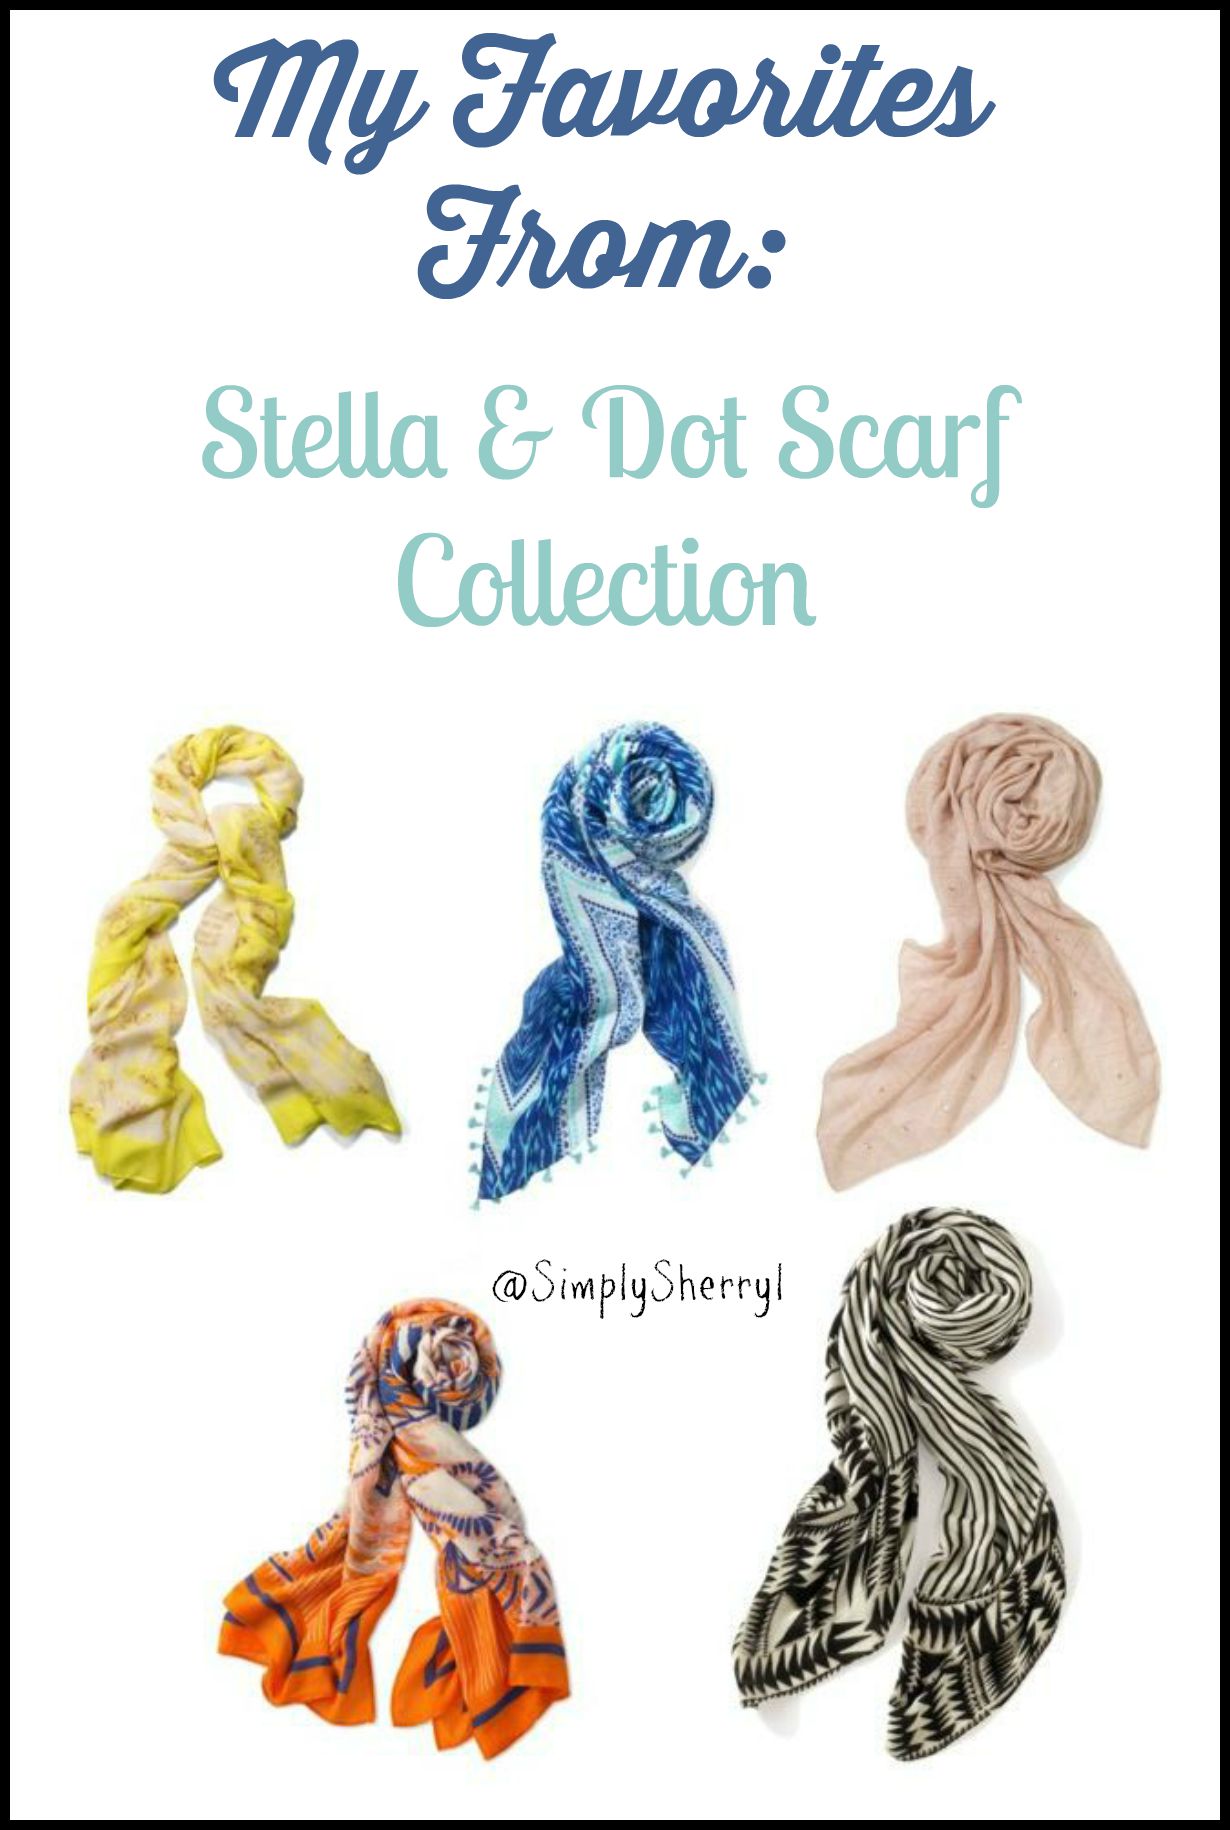 Stella & Dot Scarf Collection